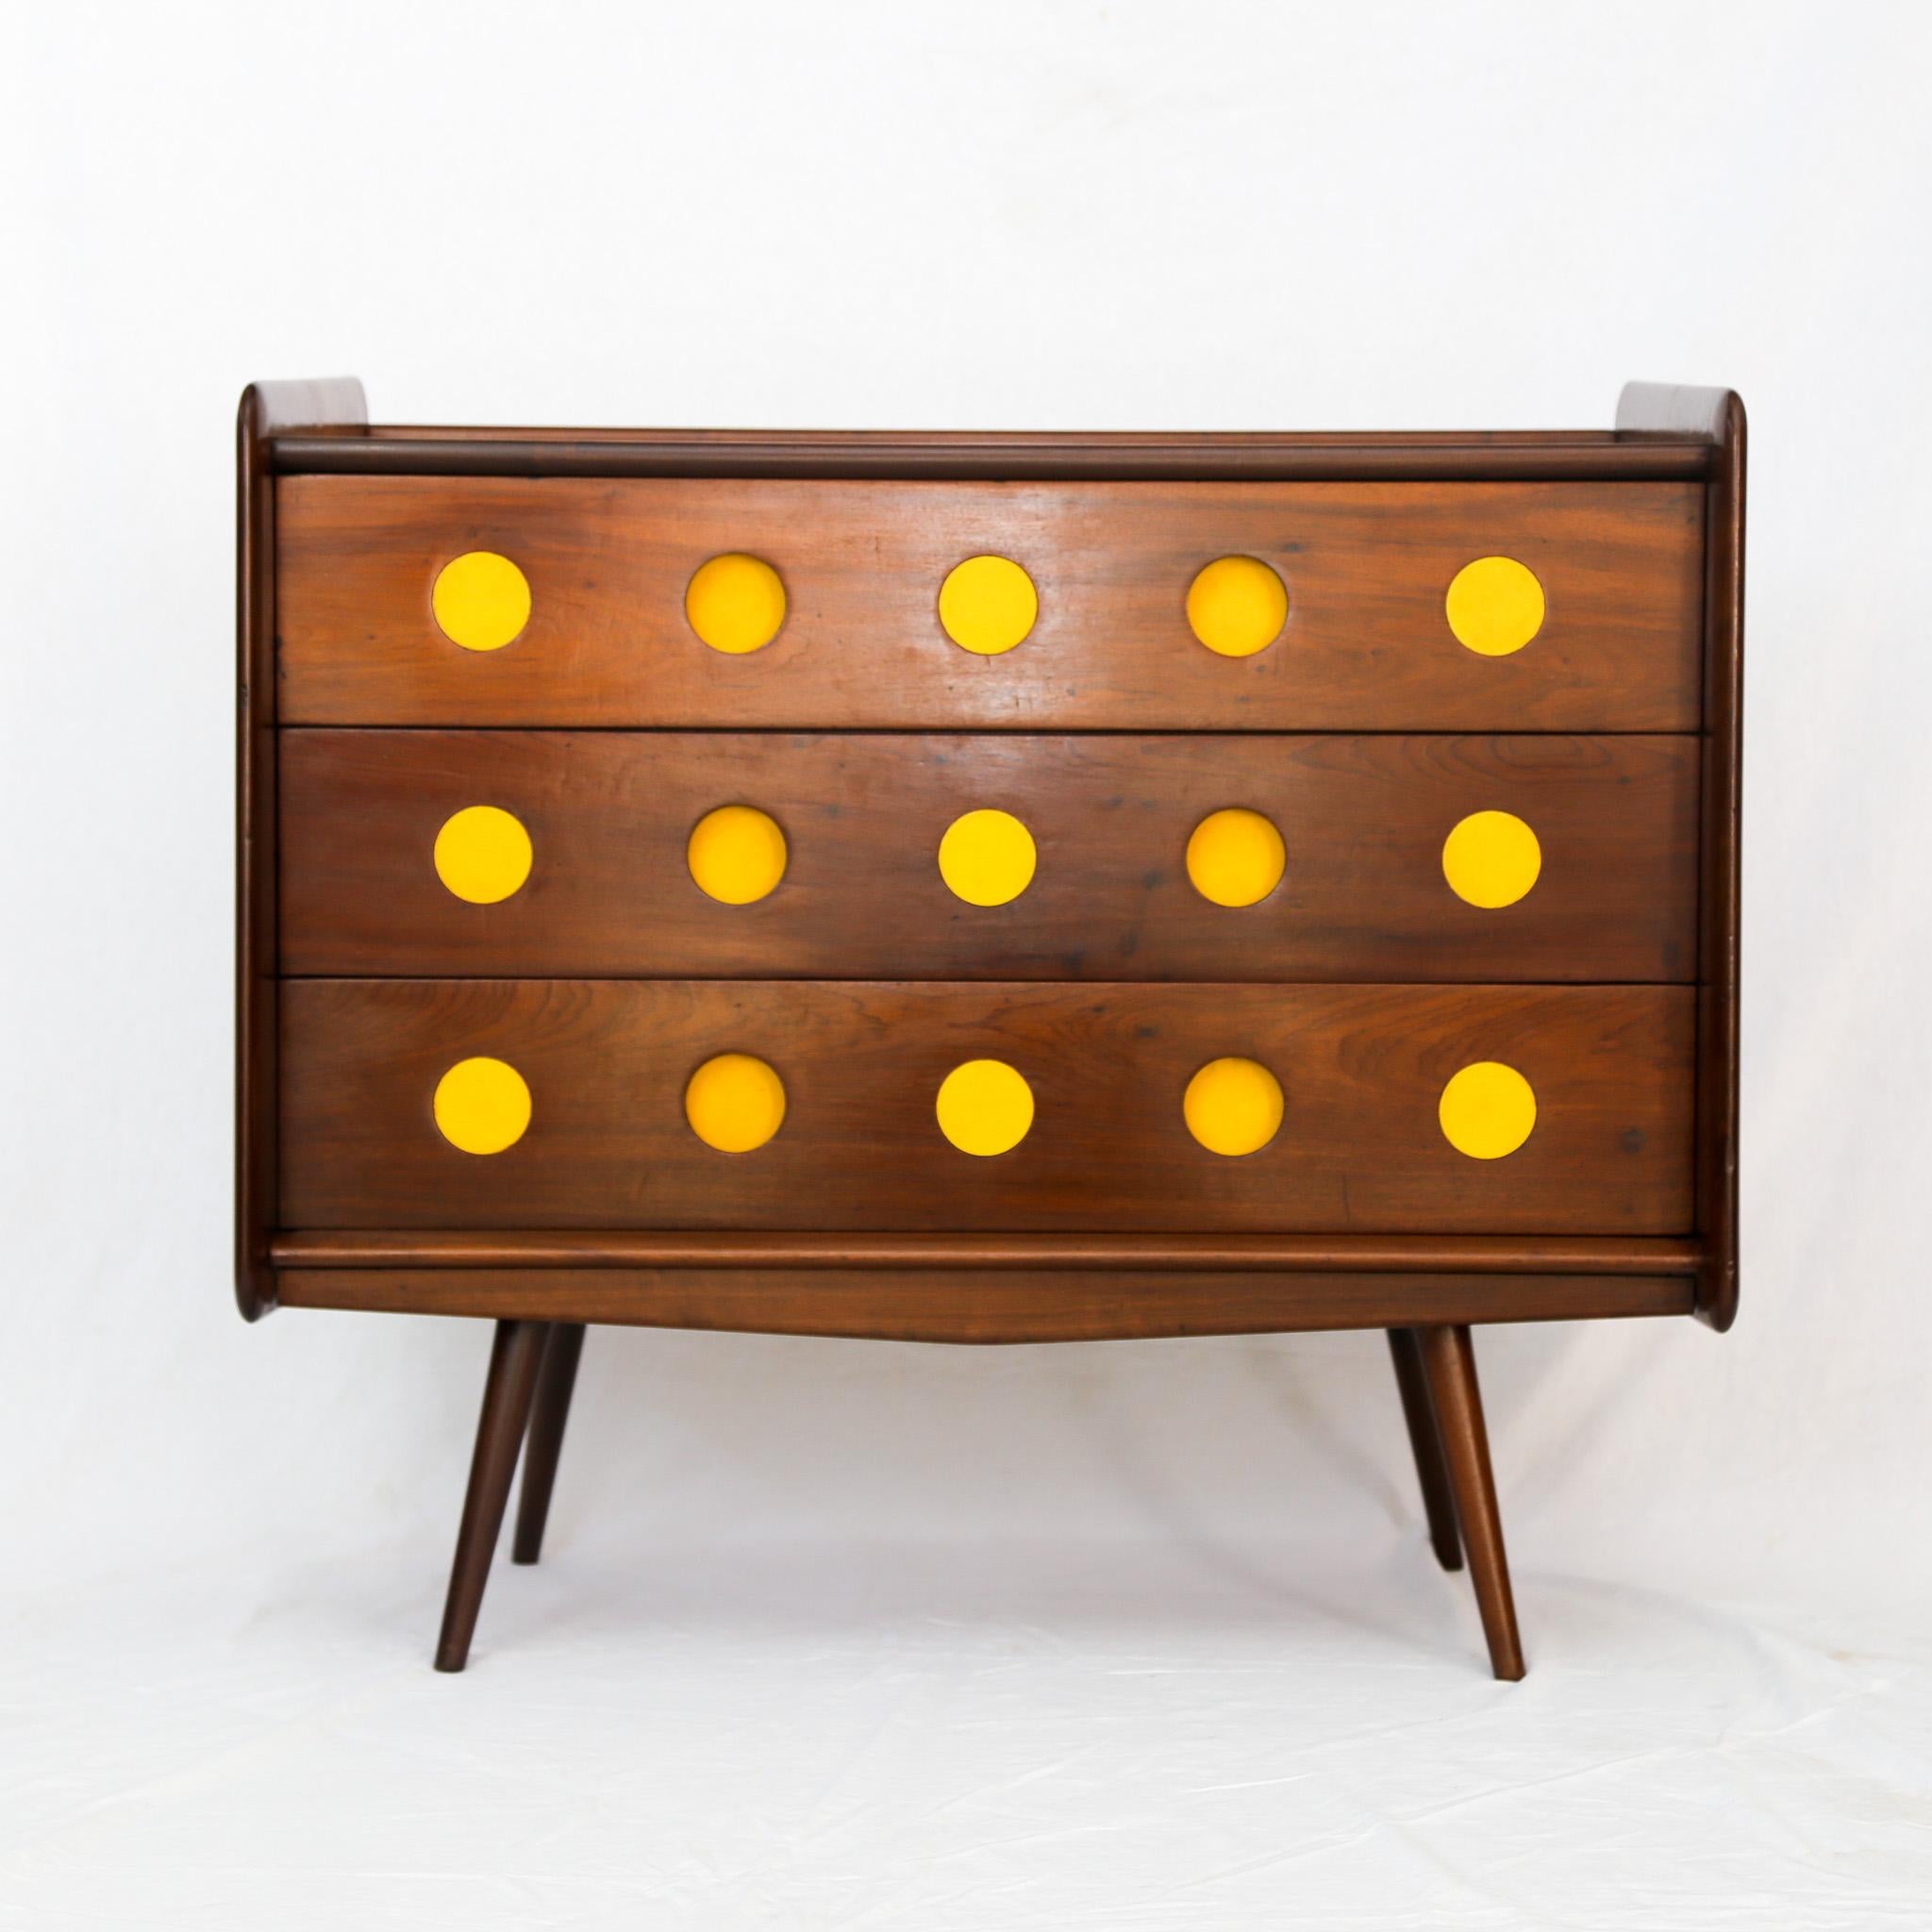 Available today, this Mid-Century Modern chest of drawers made in hardwood and yellow formica designed by Moveis Cimo in the fifties is a very rare FIND and is gorgeous!

The chest is entirely made in Imbuia hardwood and features a rectangular